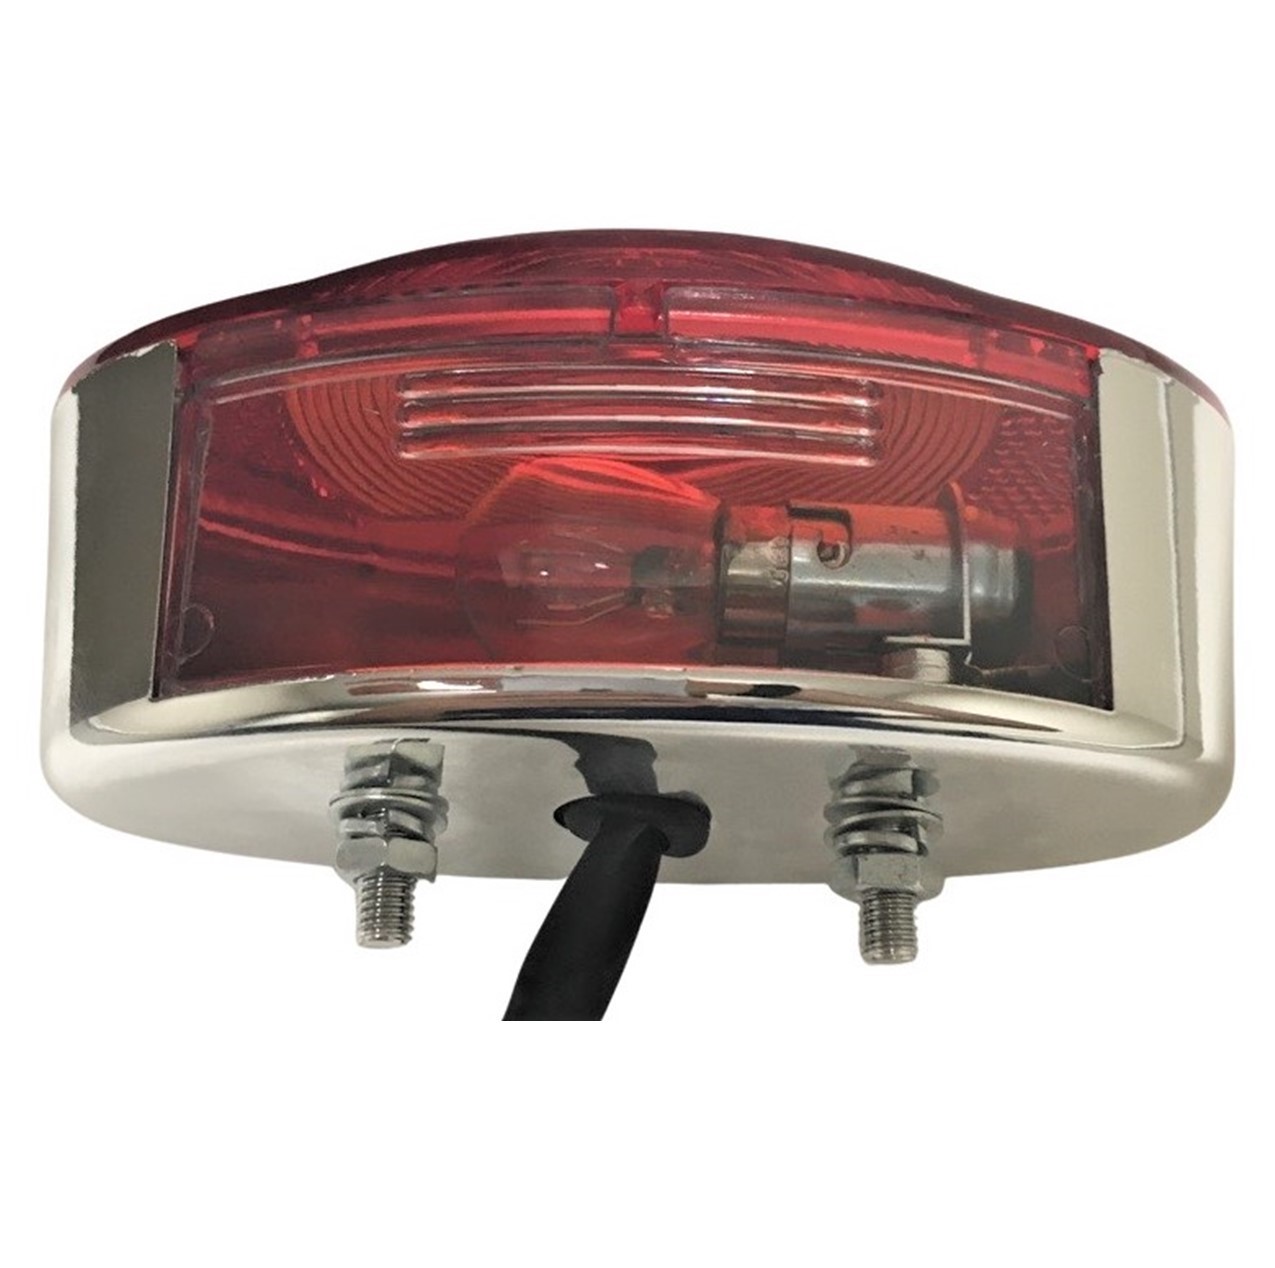 Tail Light (GoKart) Fits Many Chinese GoKarts W=128 H=65 Bolts c/c=49 3 Pins in 3 Pin Female Jack Comes with the wiring housing shown in our picture. You will need to put the wires in the housing. - Click Image to Close